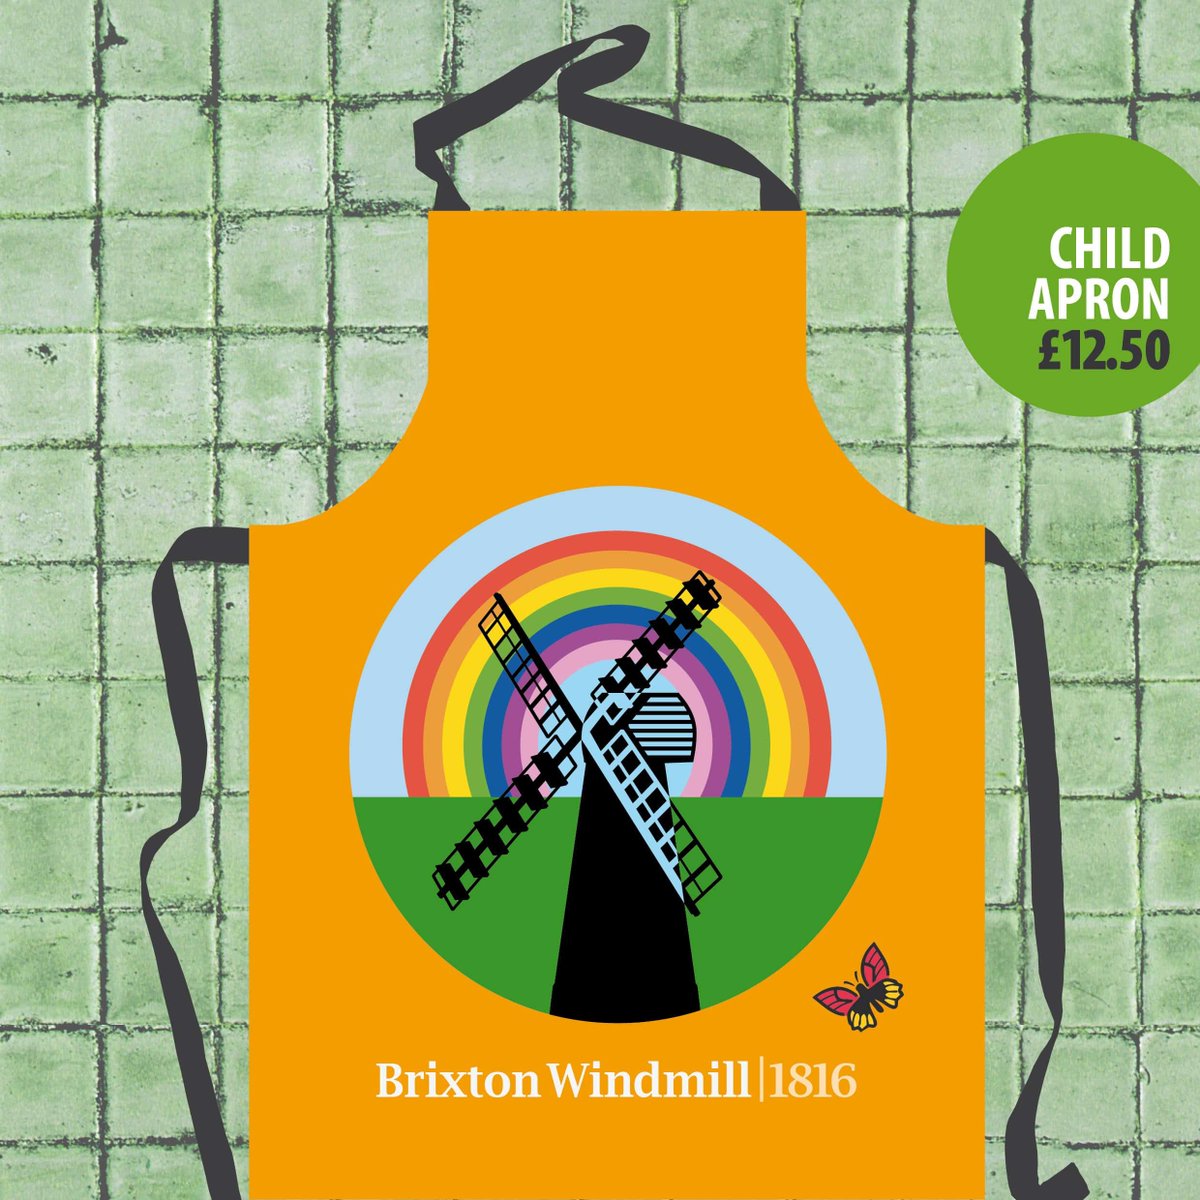 Visit our shop this Sunday 12noon to 3.30pm - lots of fabulous Brixton related gifts. New products for kids including a windmill apron and stocking filler yoyo. @BrixtonBid @BrixtonBlog